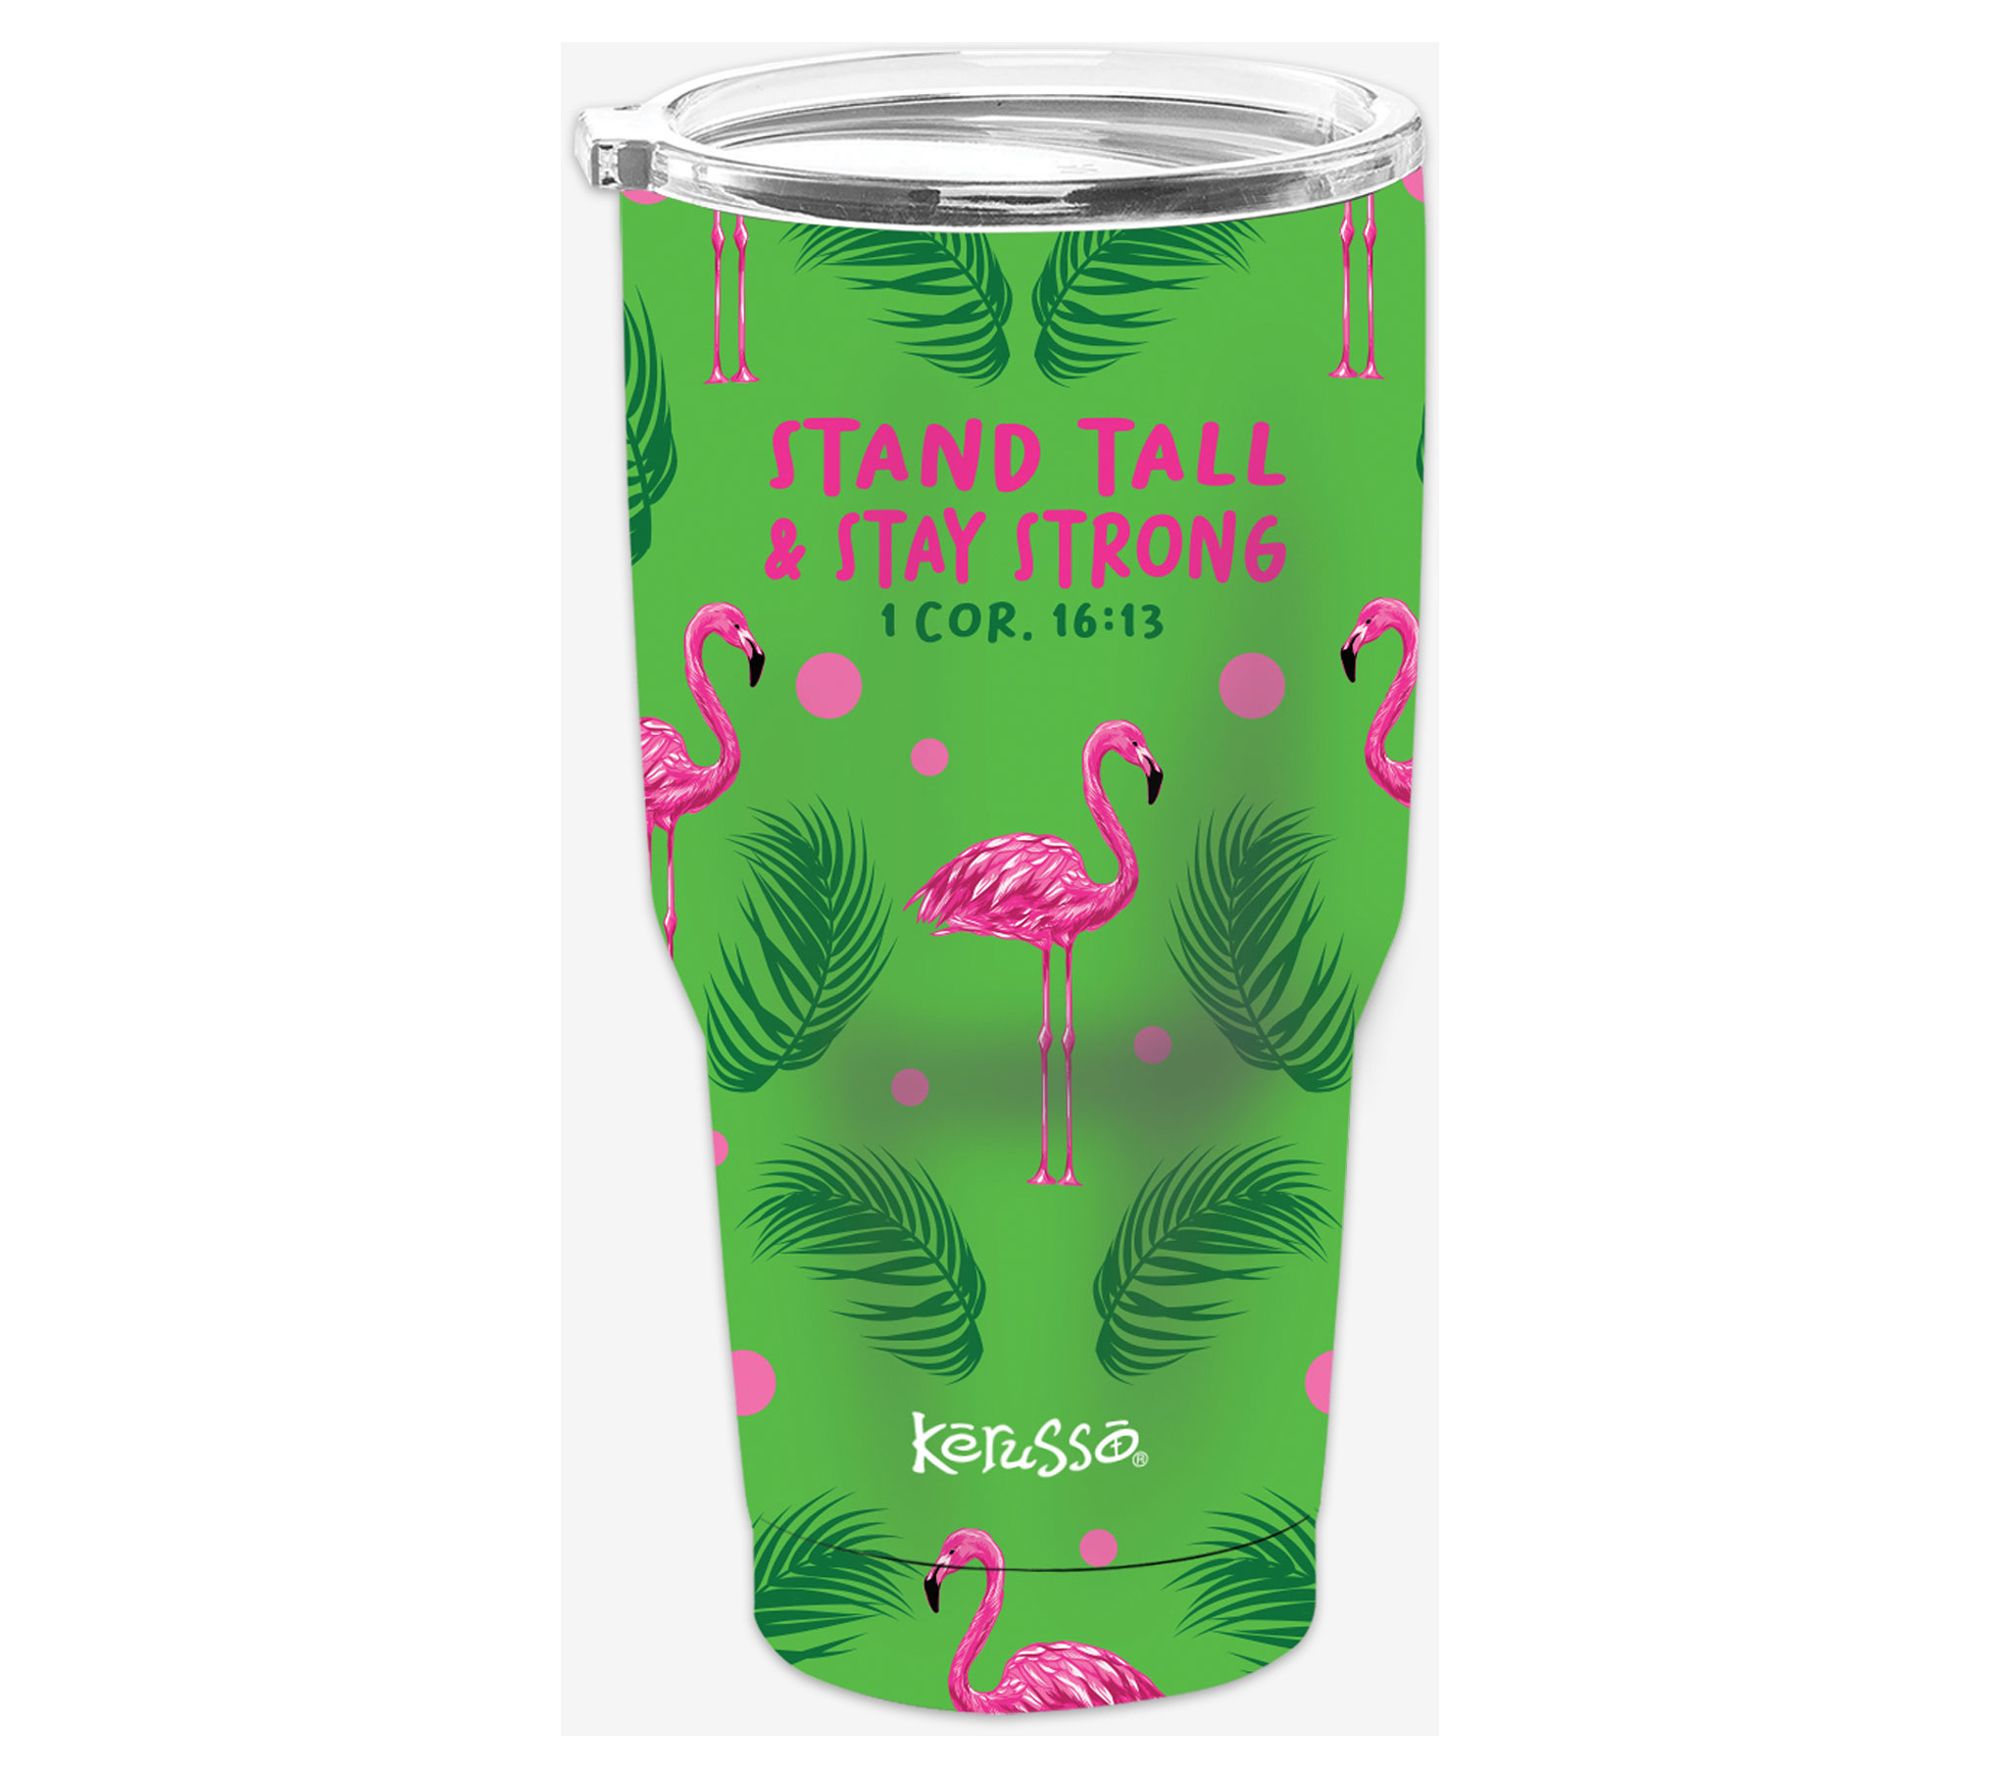 Griffin -Bulk Custom Printed 32oz Tumbler with Silicone Sleeve and Straw -  Campfire Premiums